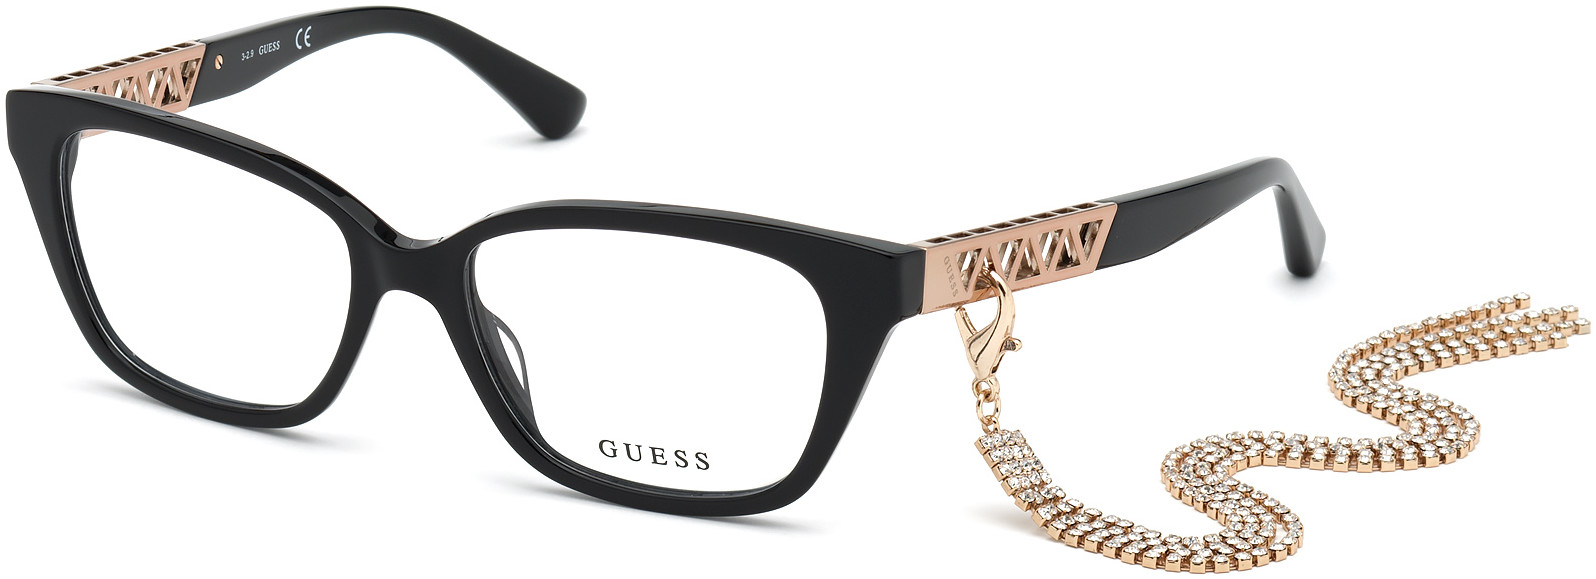 GUESS 2784